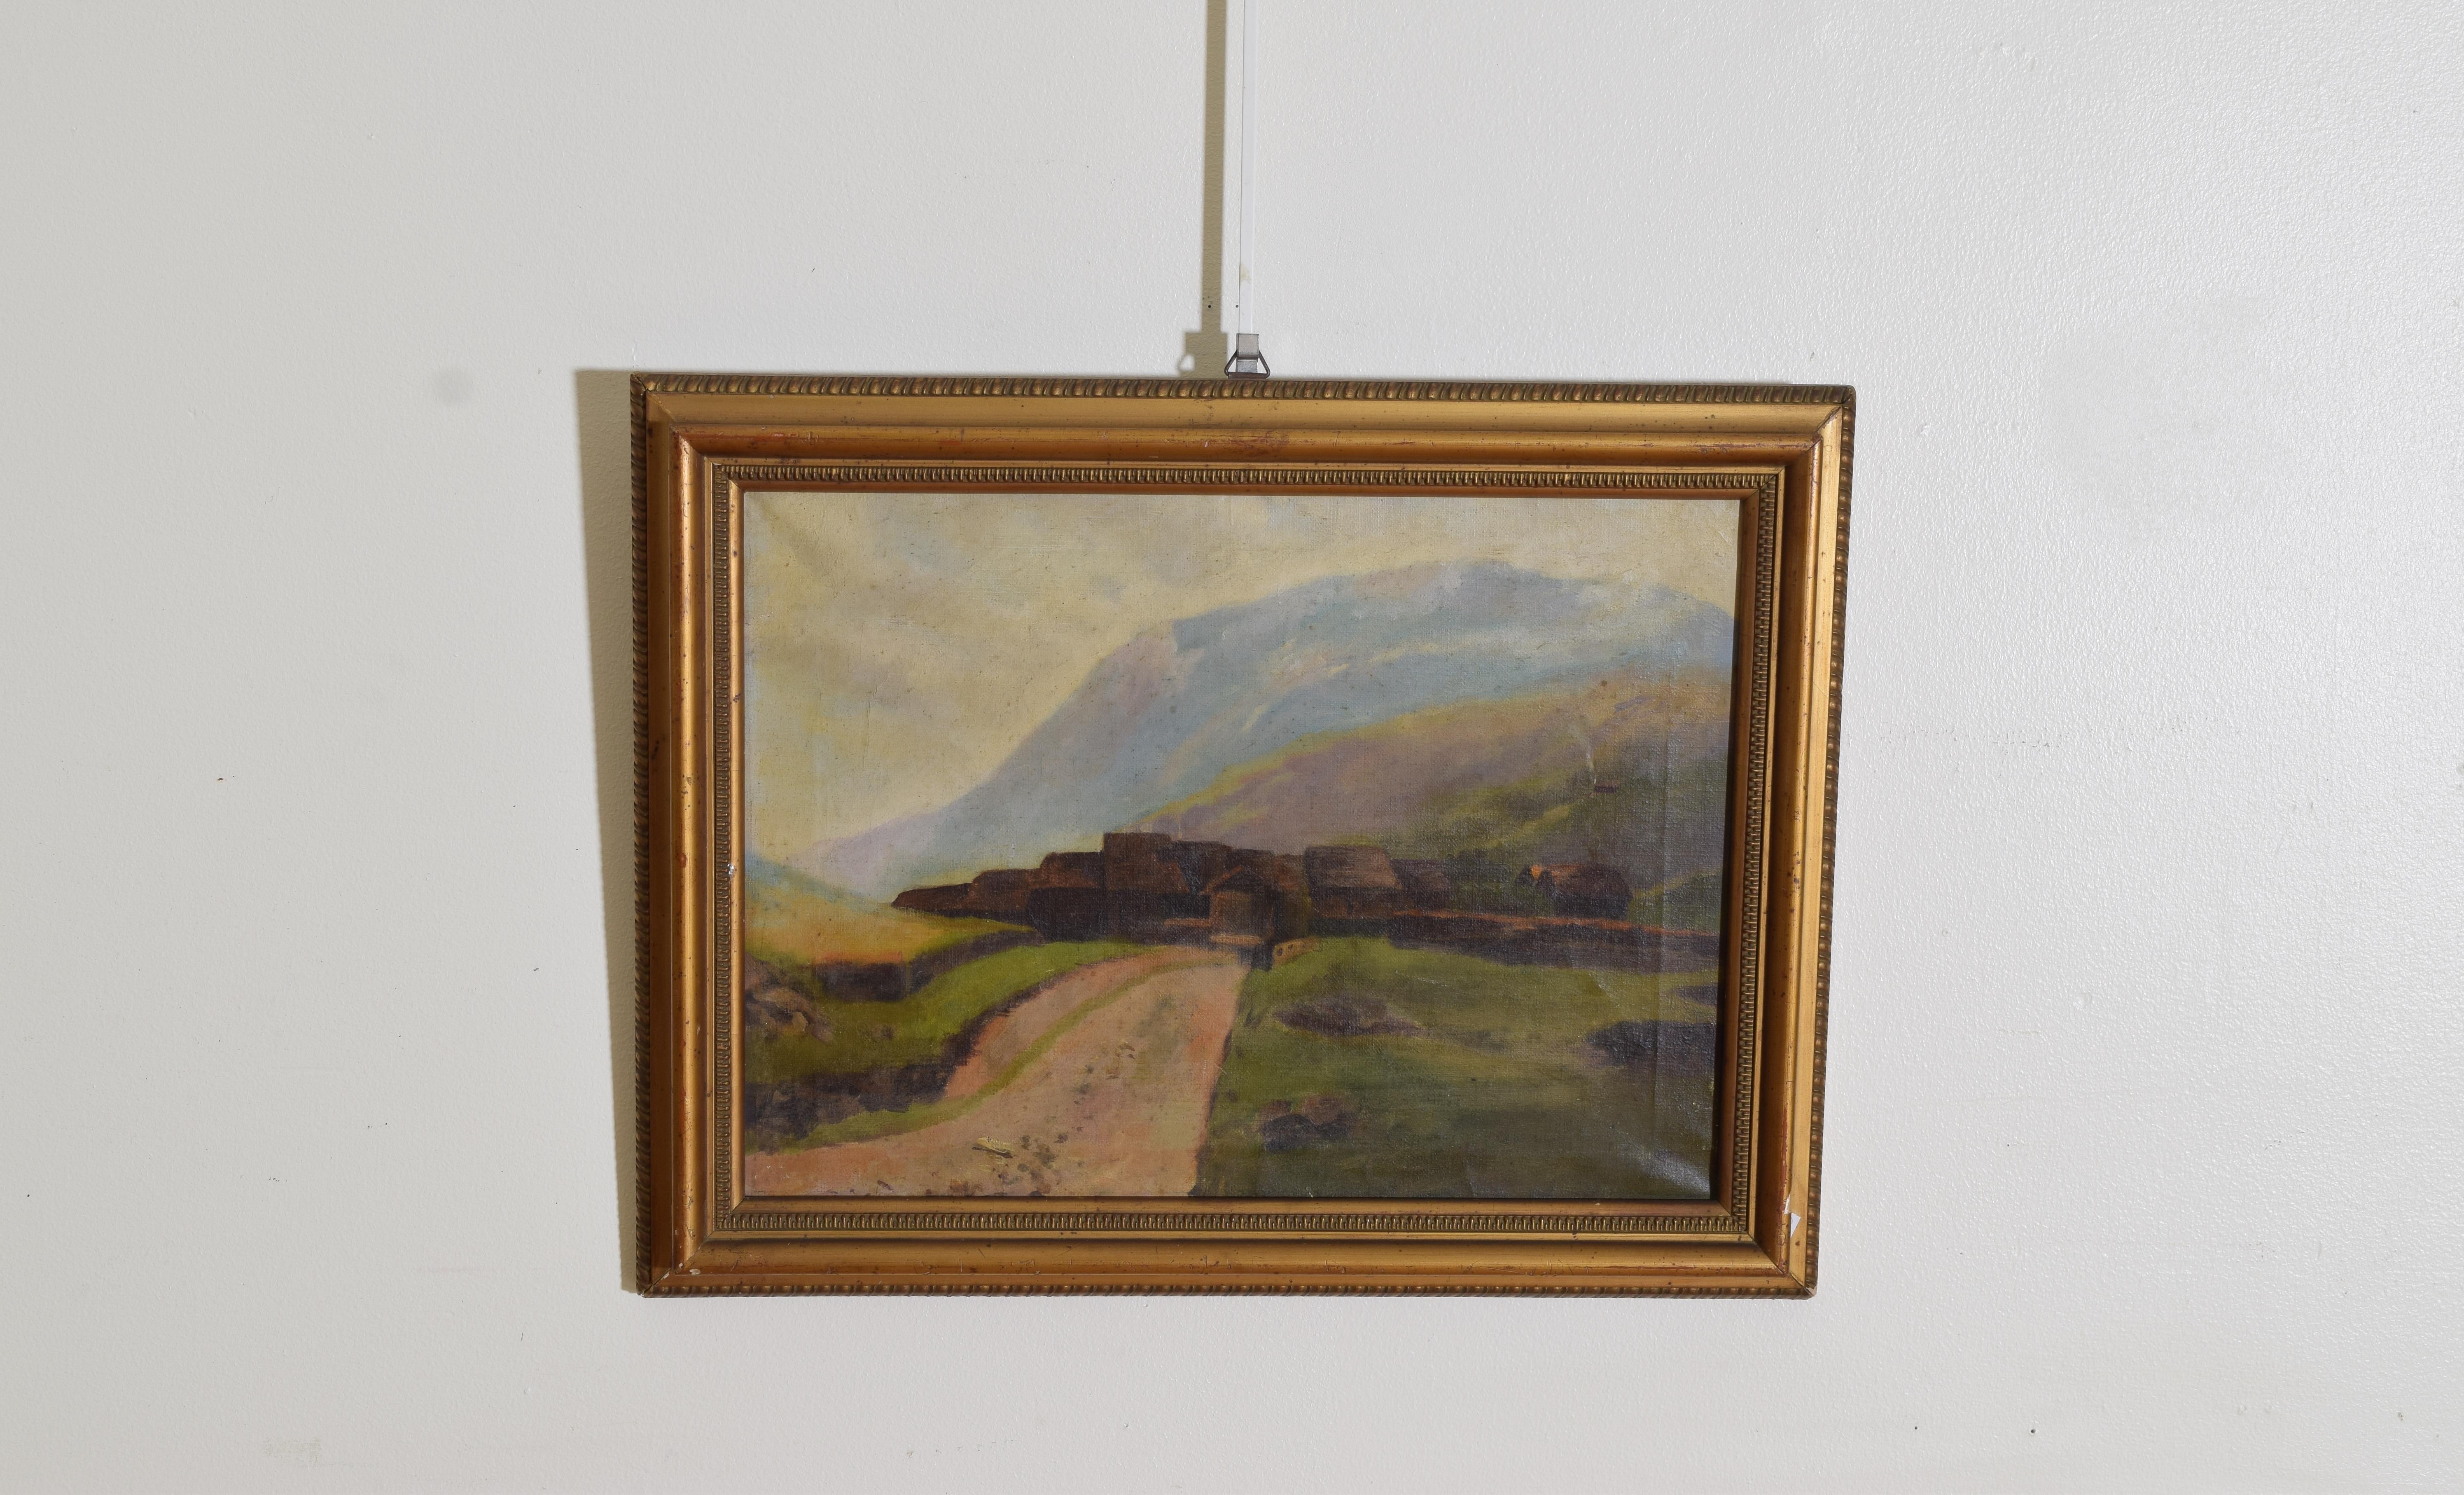 Depicting a worn road through a pasture toward a thatch roofed village with mountains in the background, in a period giltwood frame